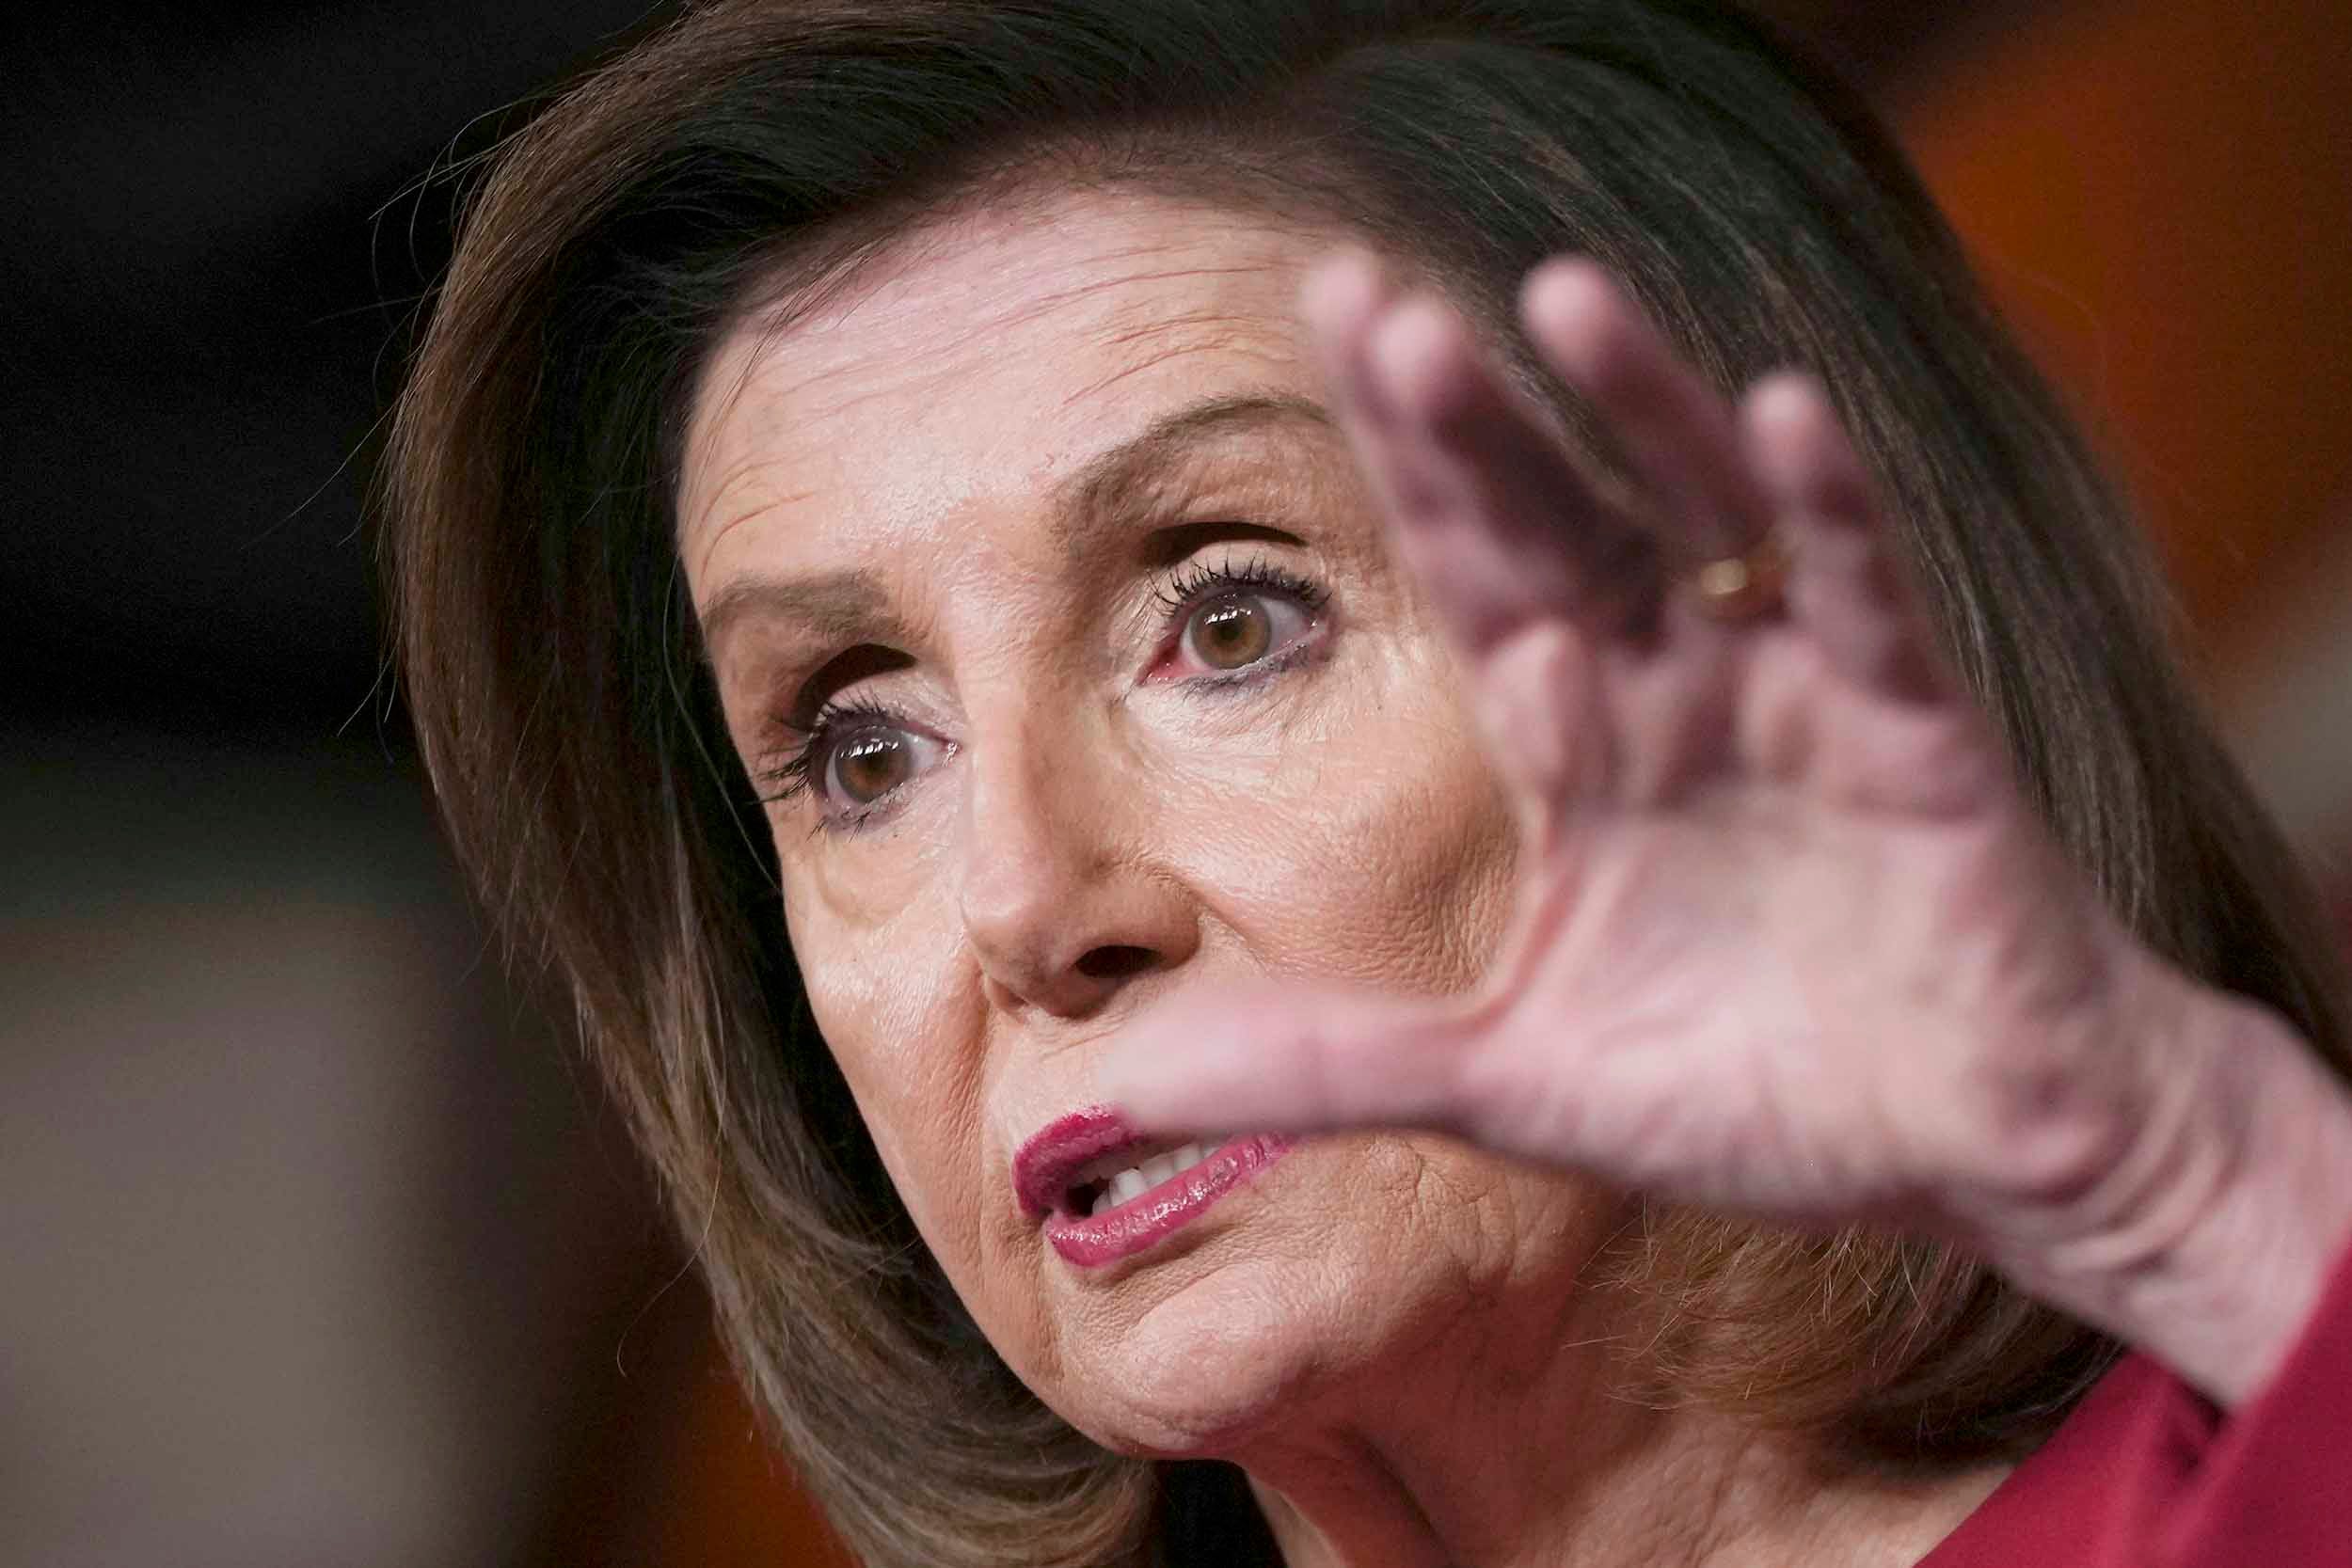 A picture of Nancy Pelosi, the speaker of the House of Representatives.